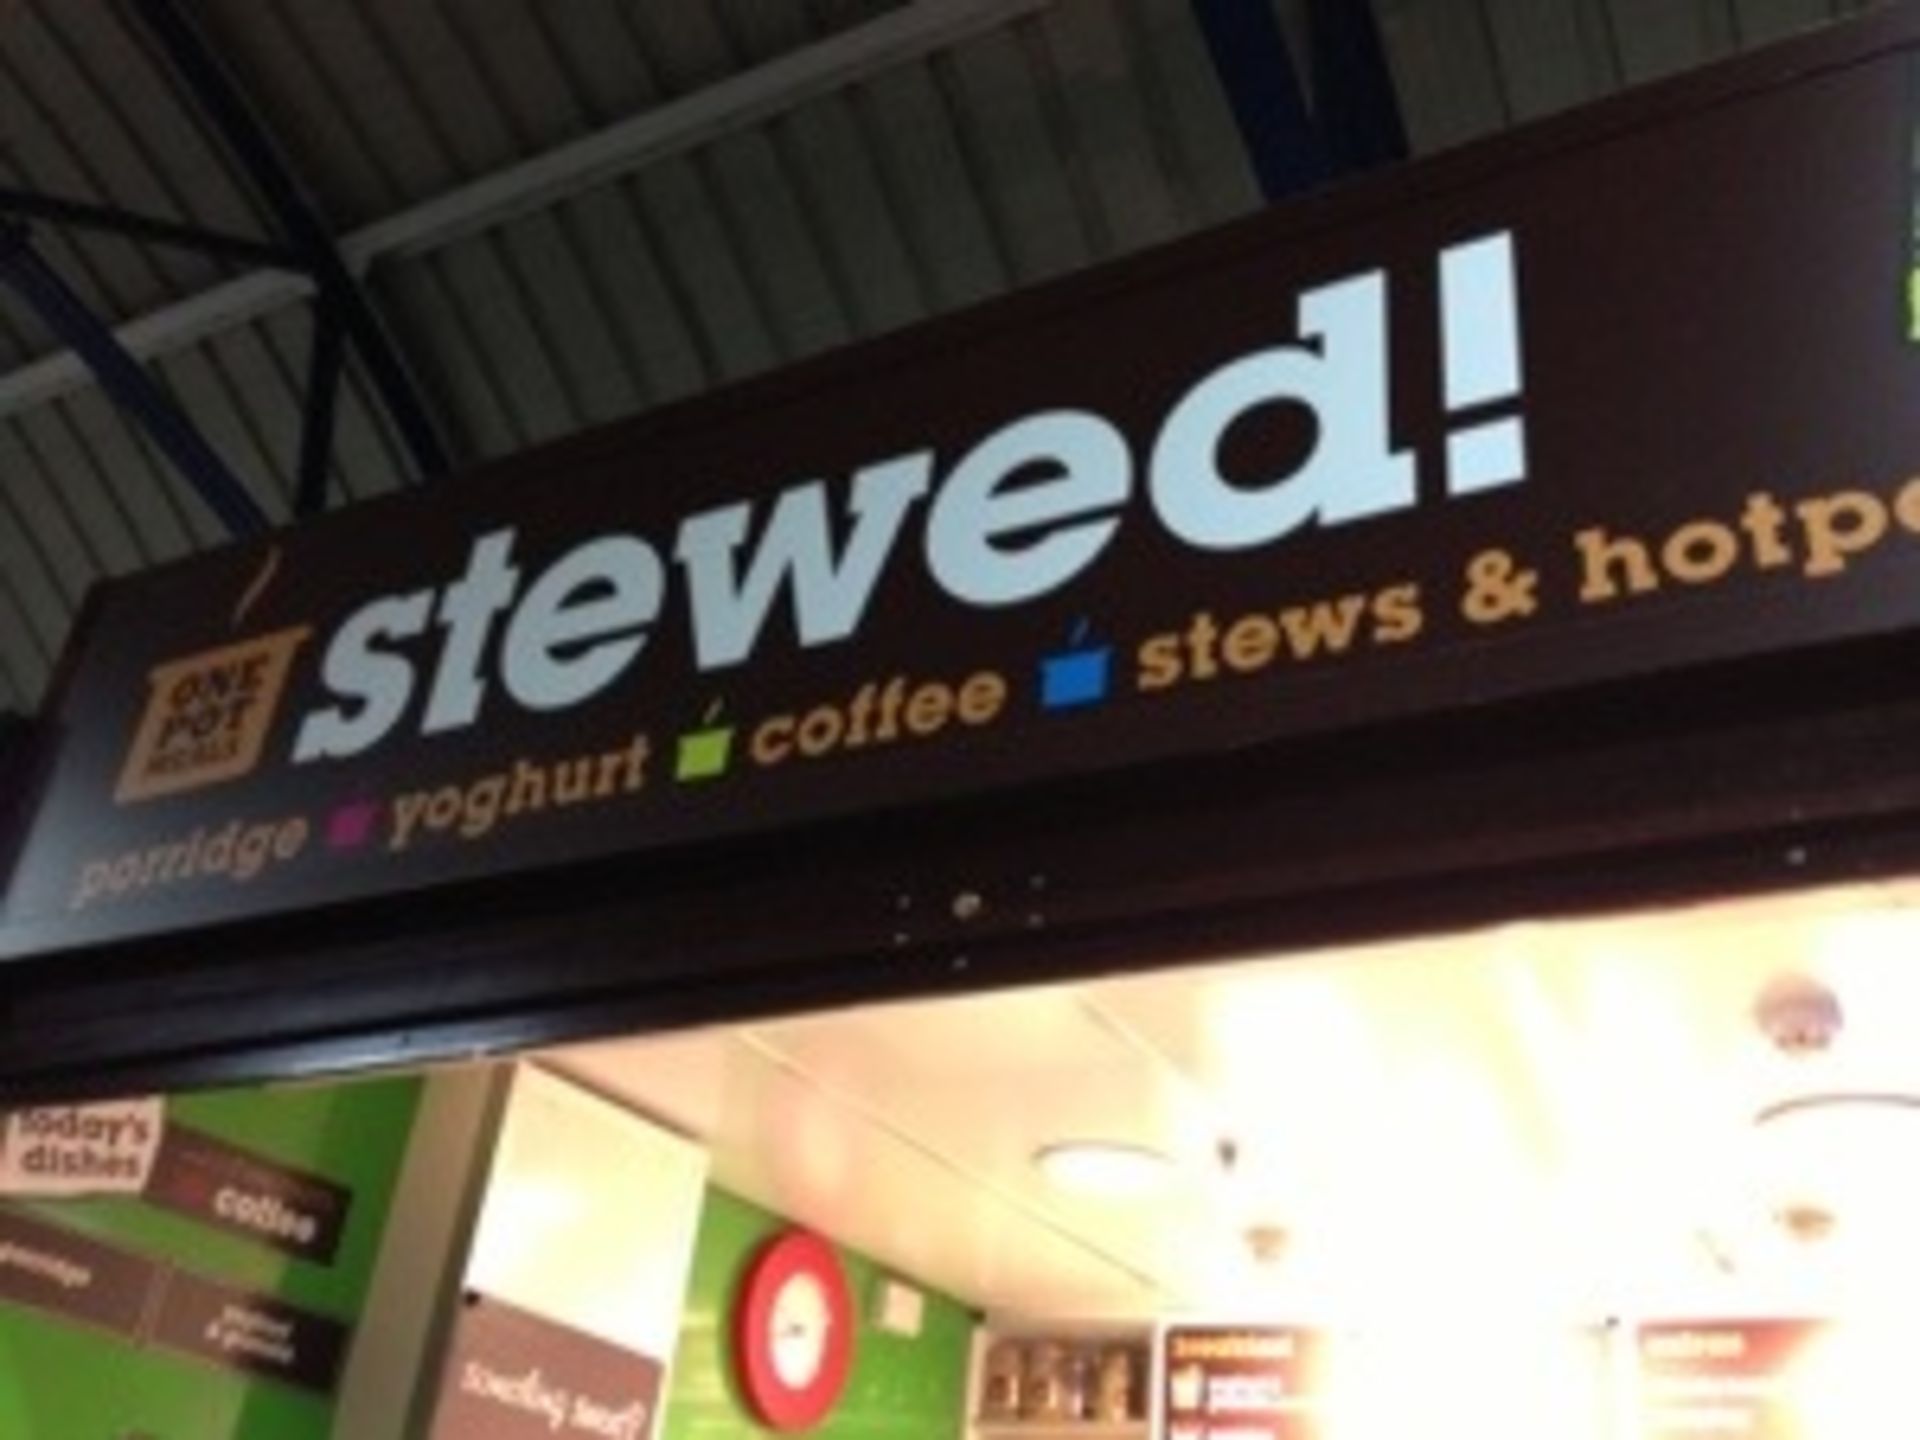 AJC Retail Solutions - Stewed Food and Coffee Kiosk - Complete Business Opportunity! - Image 23 of 25